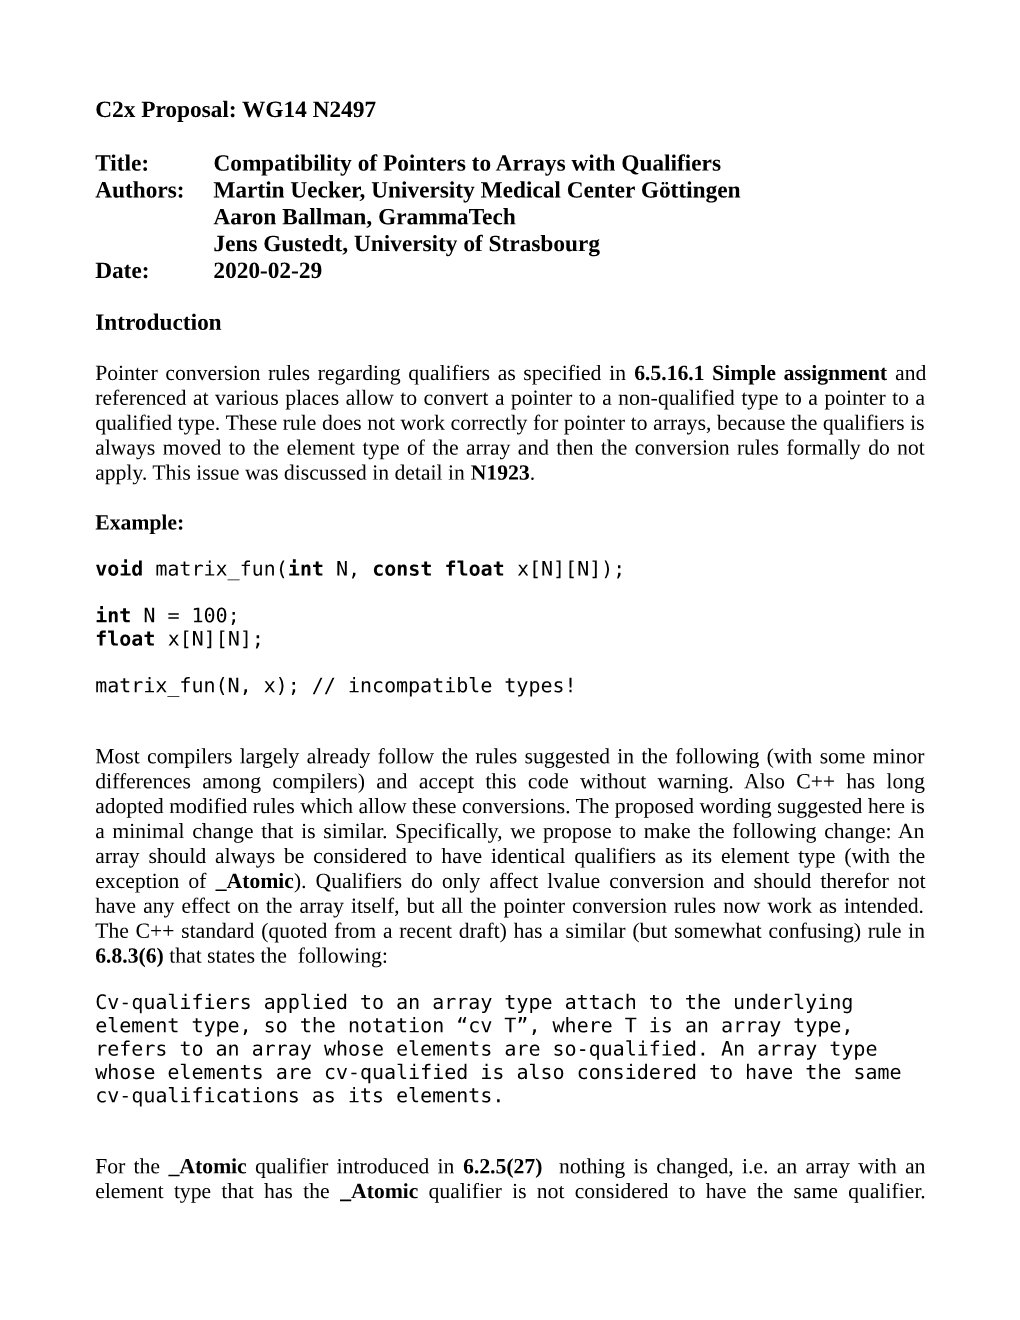 C2x Proposal: WG14 N2497 Title: Compatibility Of